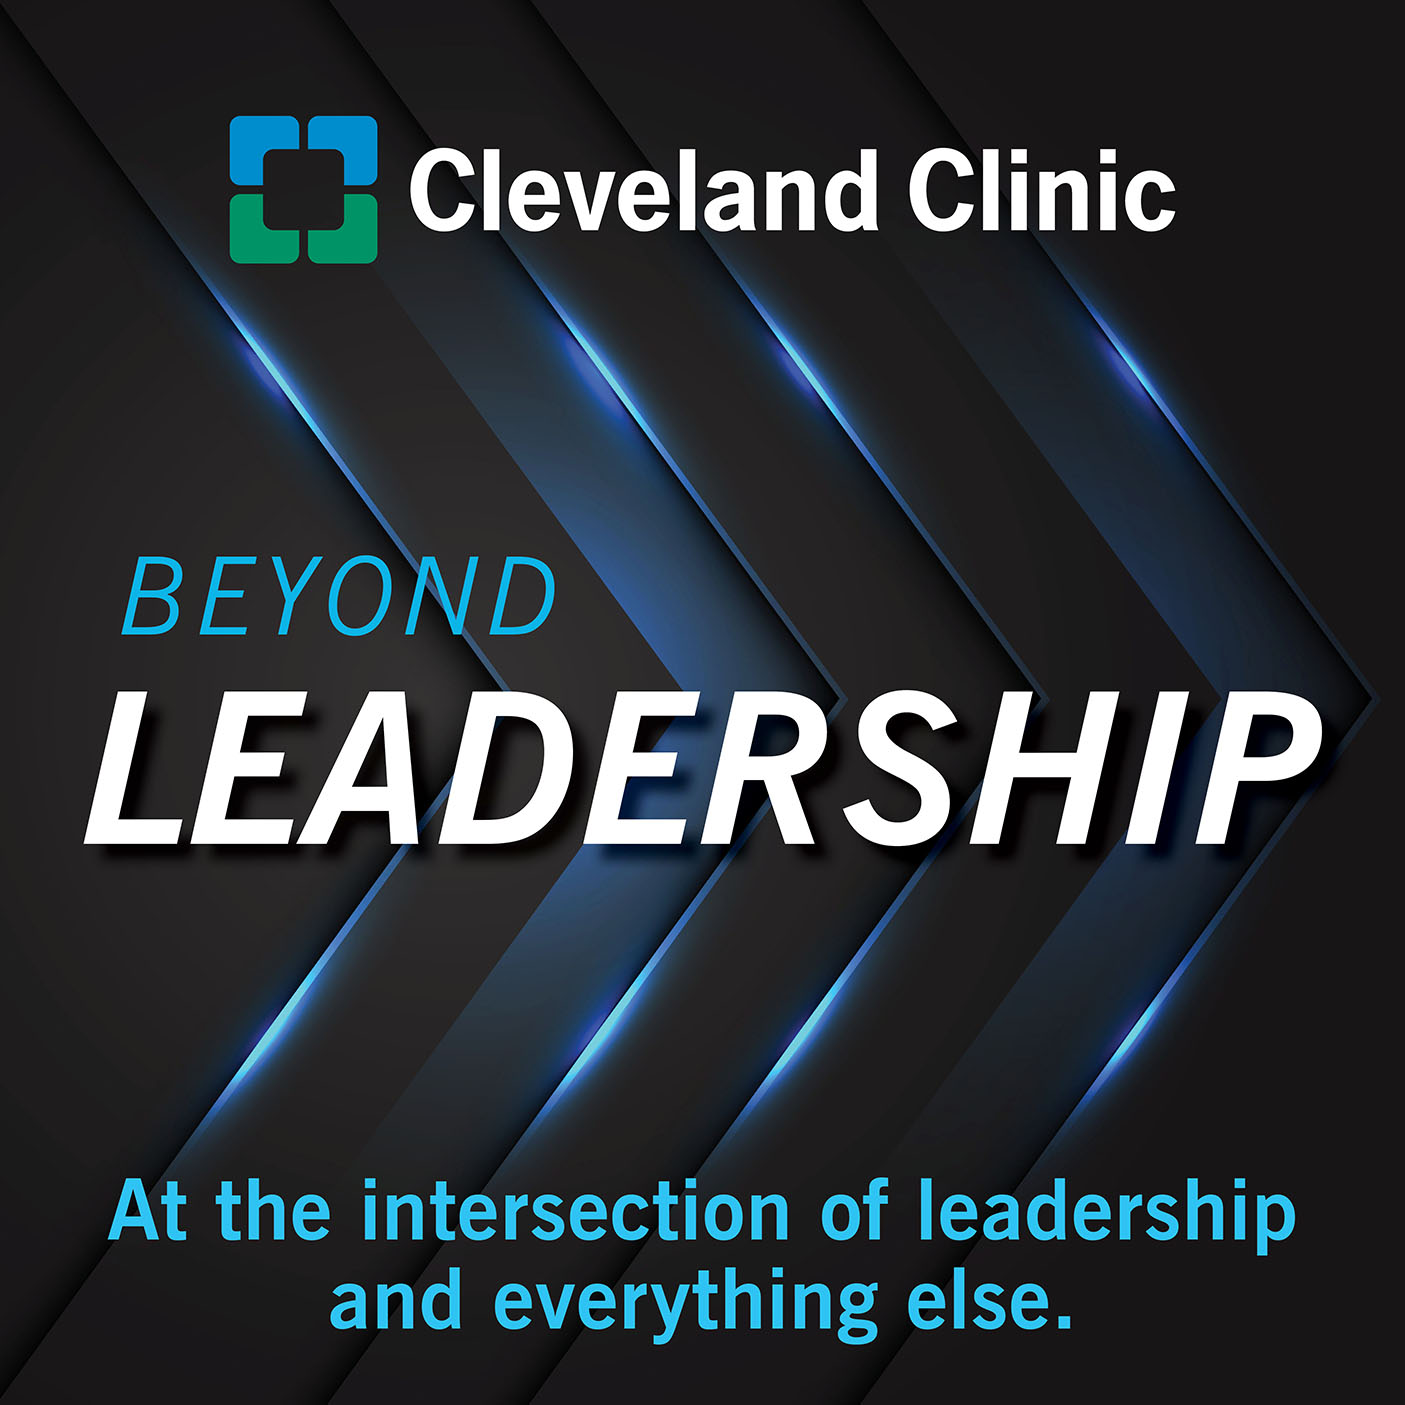 http://my.clevelandclinic.org/-/scassets/images/org/podcast-images/beyond-l.jpg